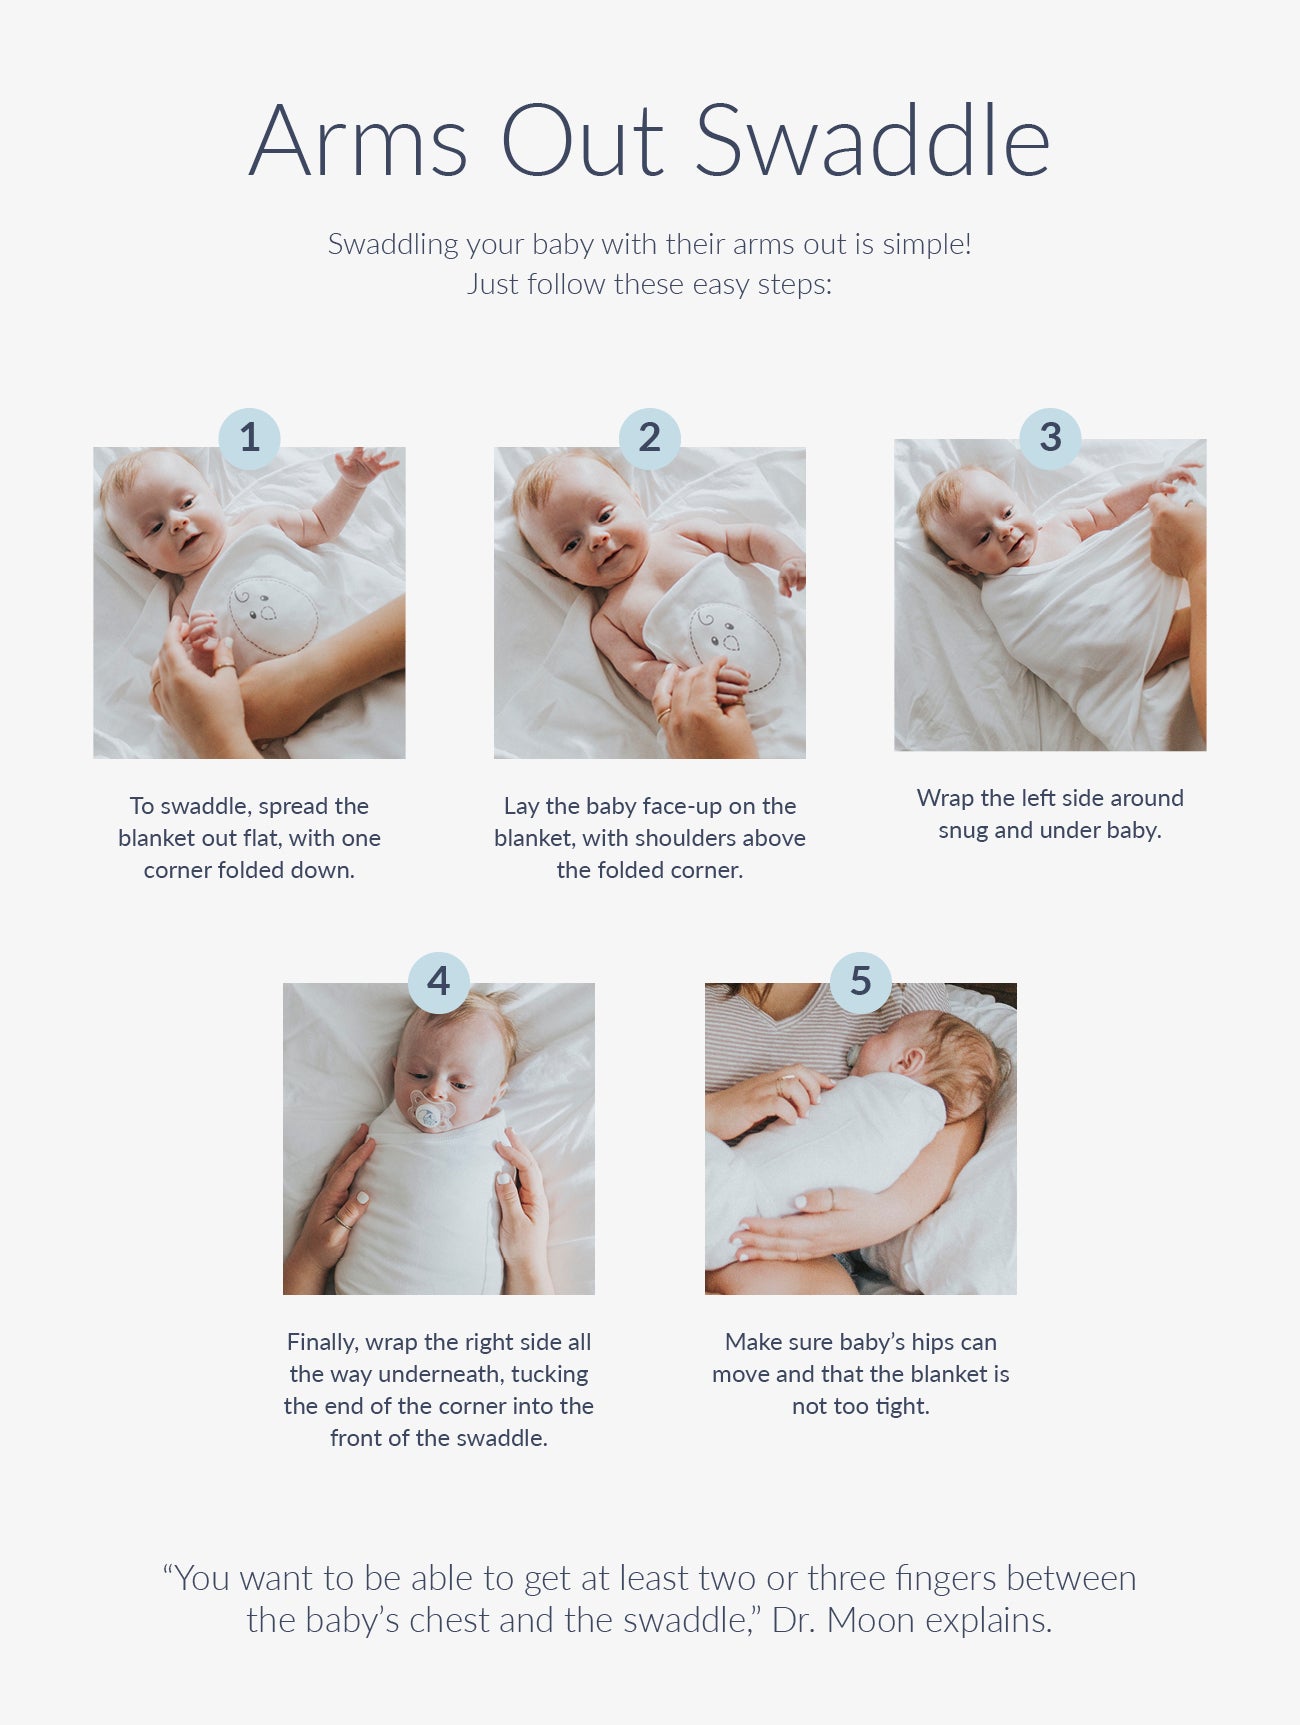 arms out swaddle infographic